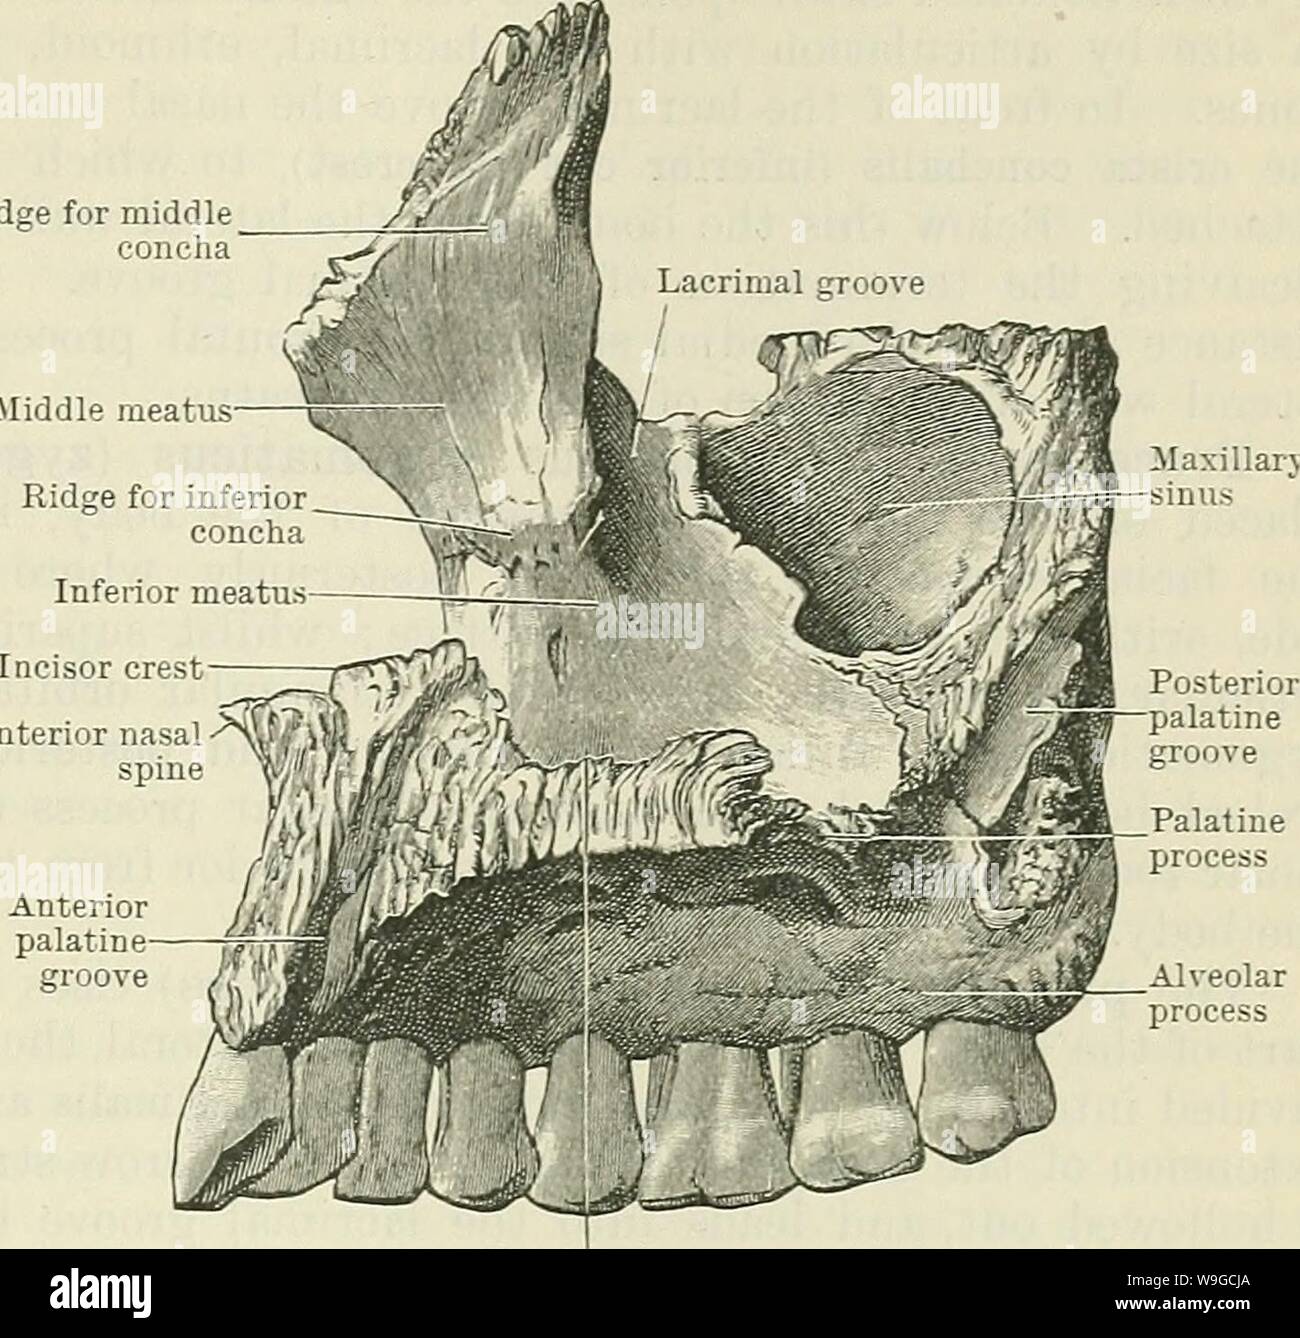 Archive image from page 180 of Cunningham's Text-book of anatomy (1914). Cunningham's Text-book of anatomy  cunninghamstextb00cunn Year: 1914 ( THE MAXILLAEY BONES. 147 or postero - lateral surface is separated above from rounded free edge, which forms the anterior margin Ridge for middle concha Middle meatus Frontal process    Anterior nasal spine Palatine process Fig. 158.—The Right Maxilla (Medial Aspect). The infra - temporal the orbital aspect by a of the inferior orbital fissure in the articulated skull. Inferiorlyand an- teriorly it is separated from the anterior surface by the zygomati Stock Photo